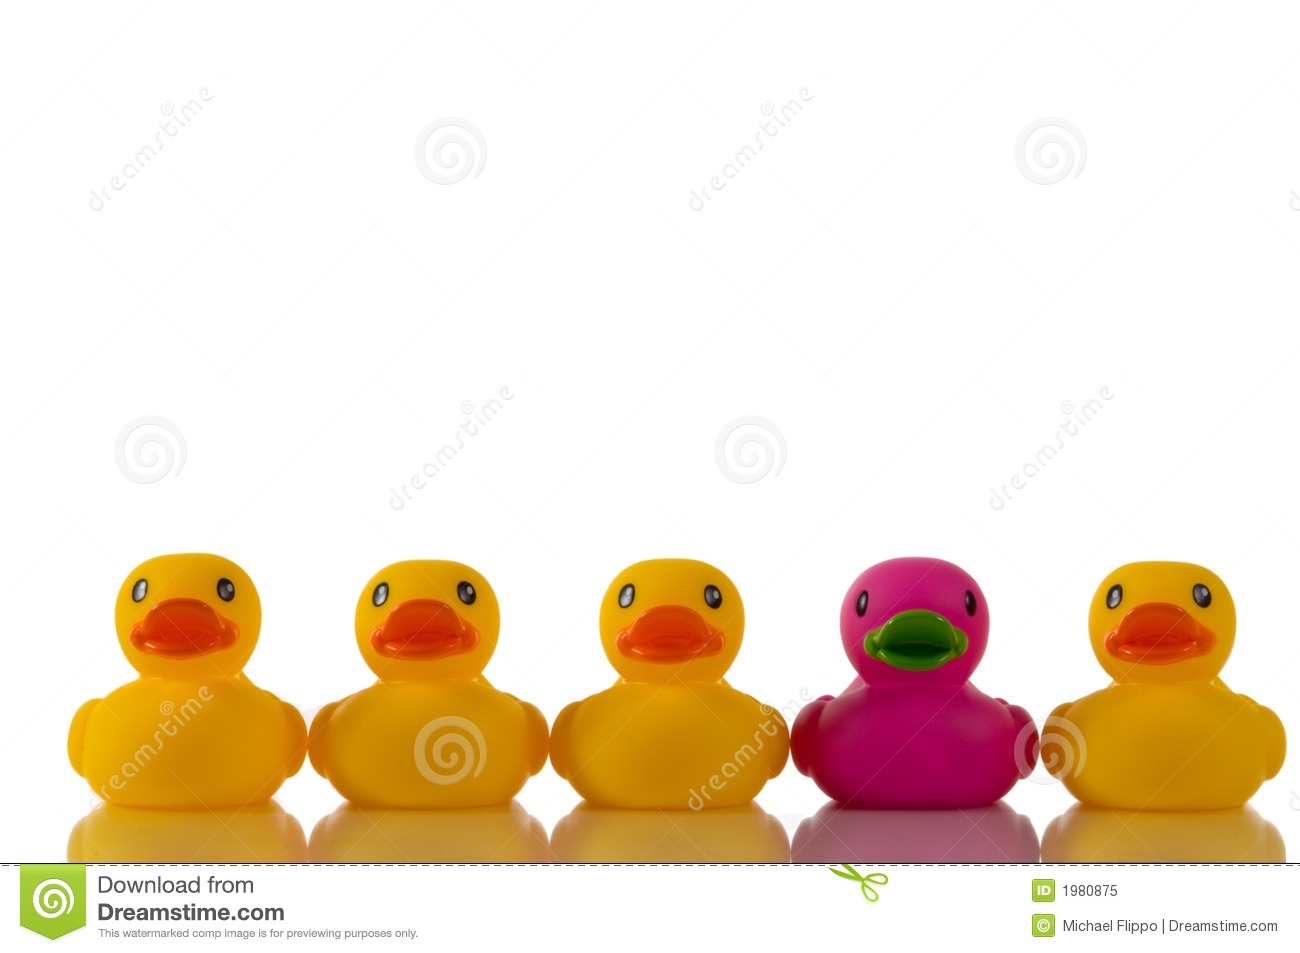 Pink Purple Rubber Duck With Yellow Ducks Royalty Free Stock Photo